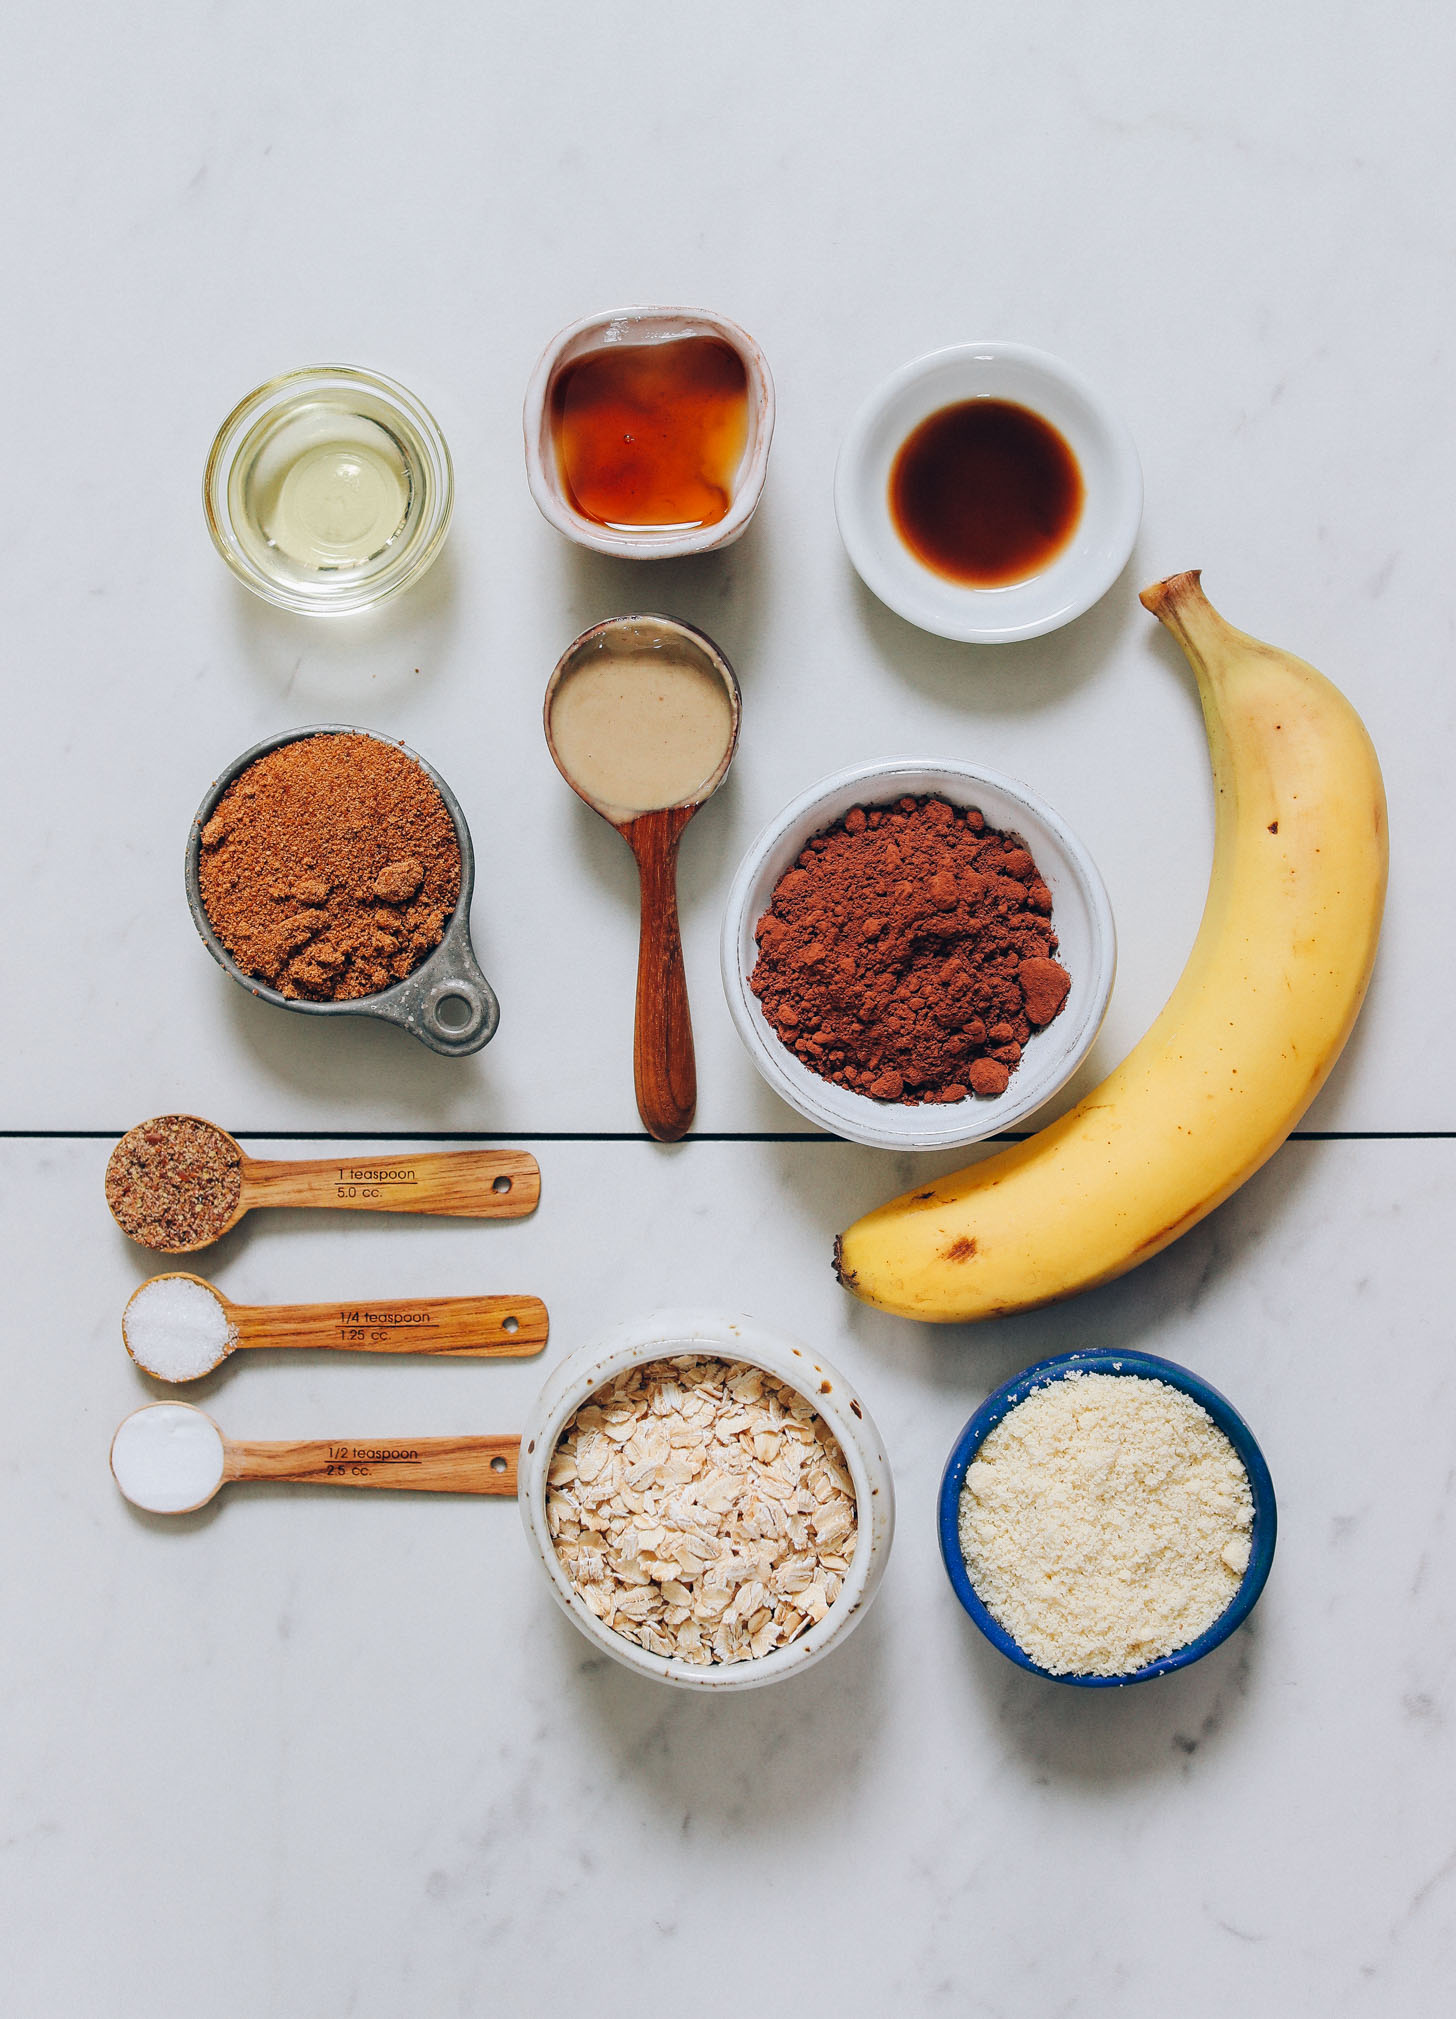 Banana, almond flour, oats, cocoa powder, coconut sugar, maple syrup, and other ingredients for making Banana Chocolate Muffins